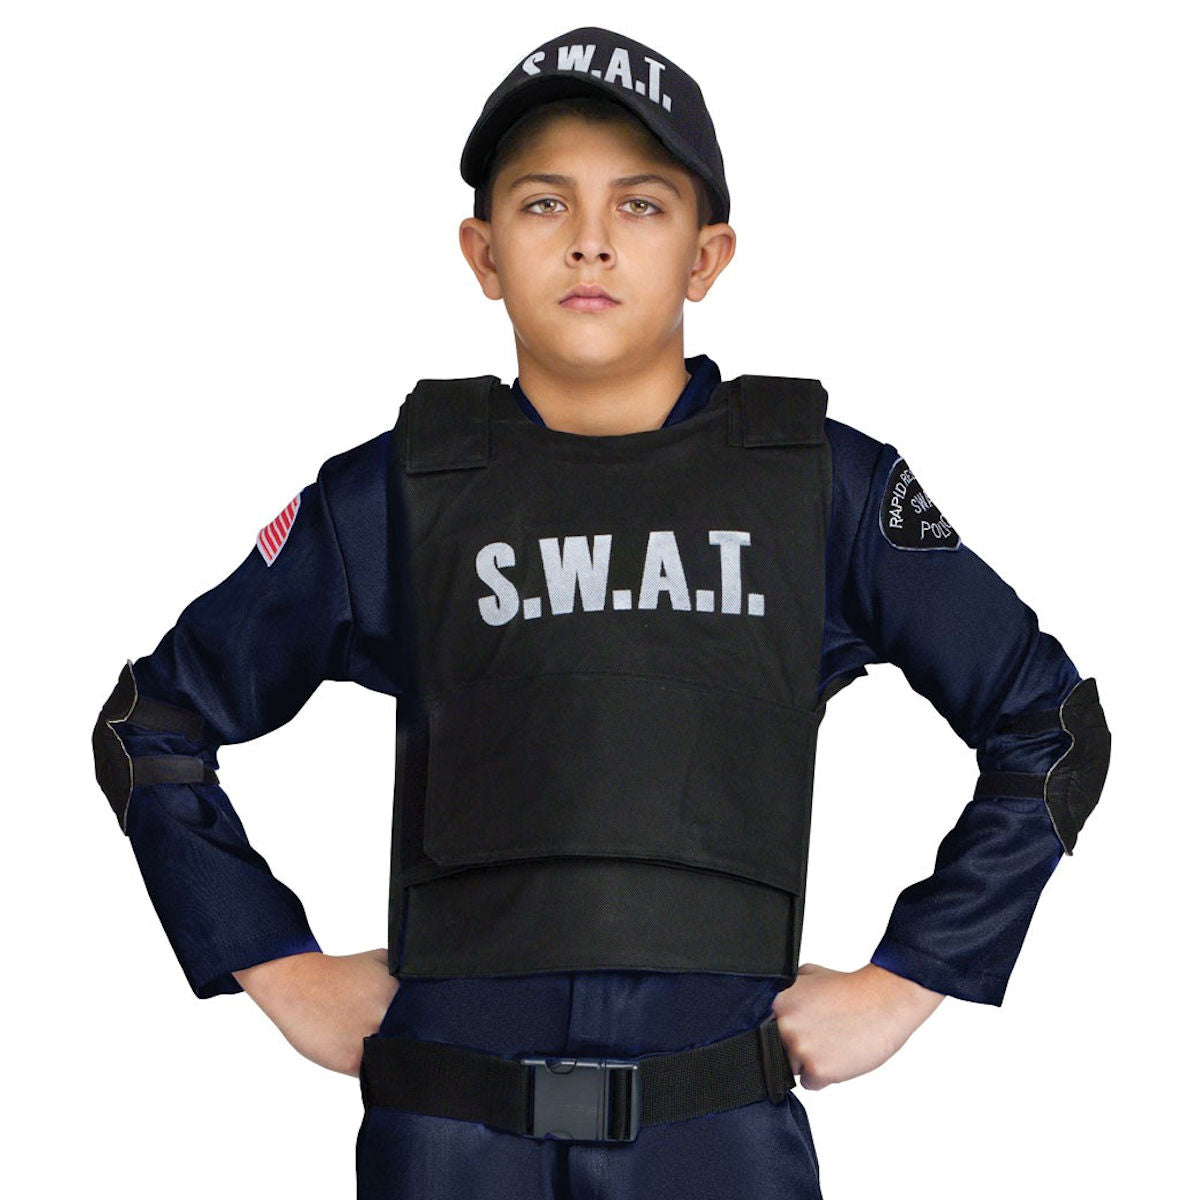 S.W.A.T. Commando Deluxe Boy's Costume includes Belt and Holster